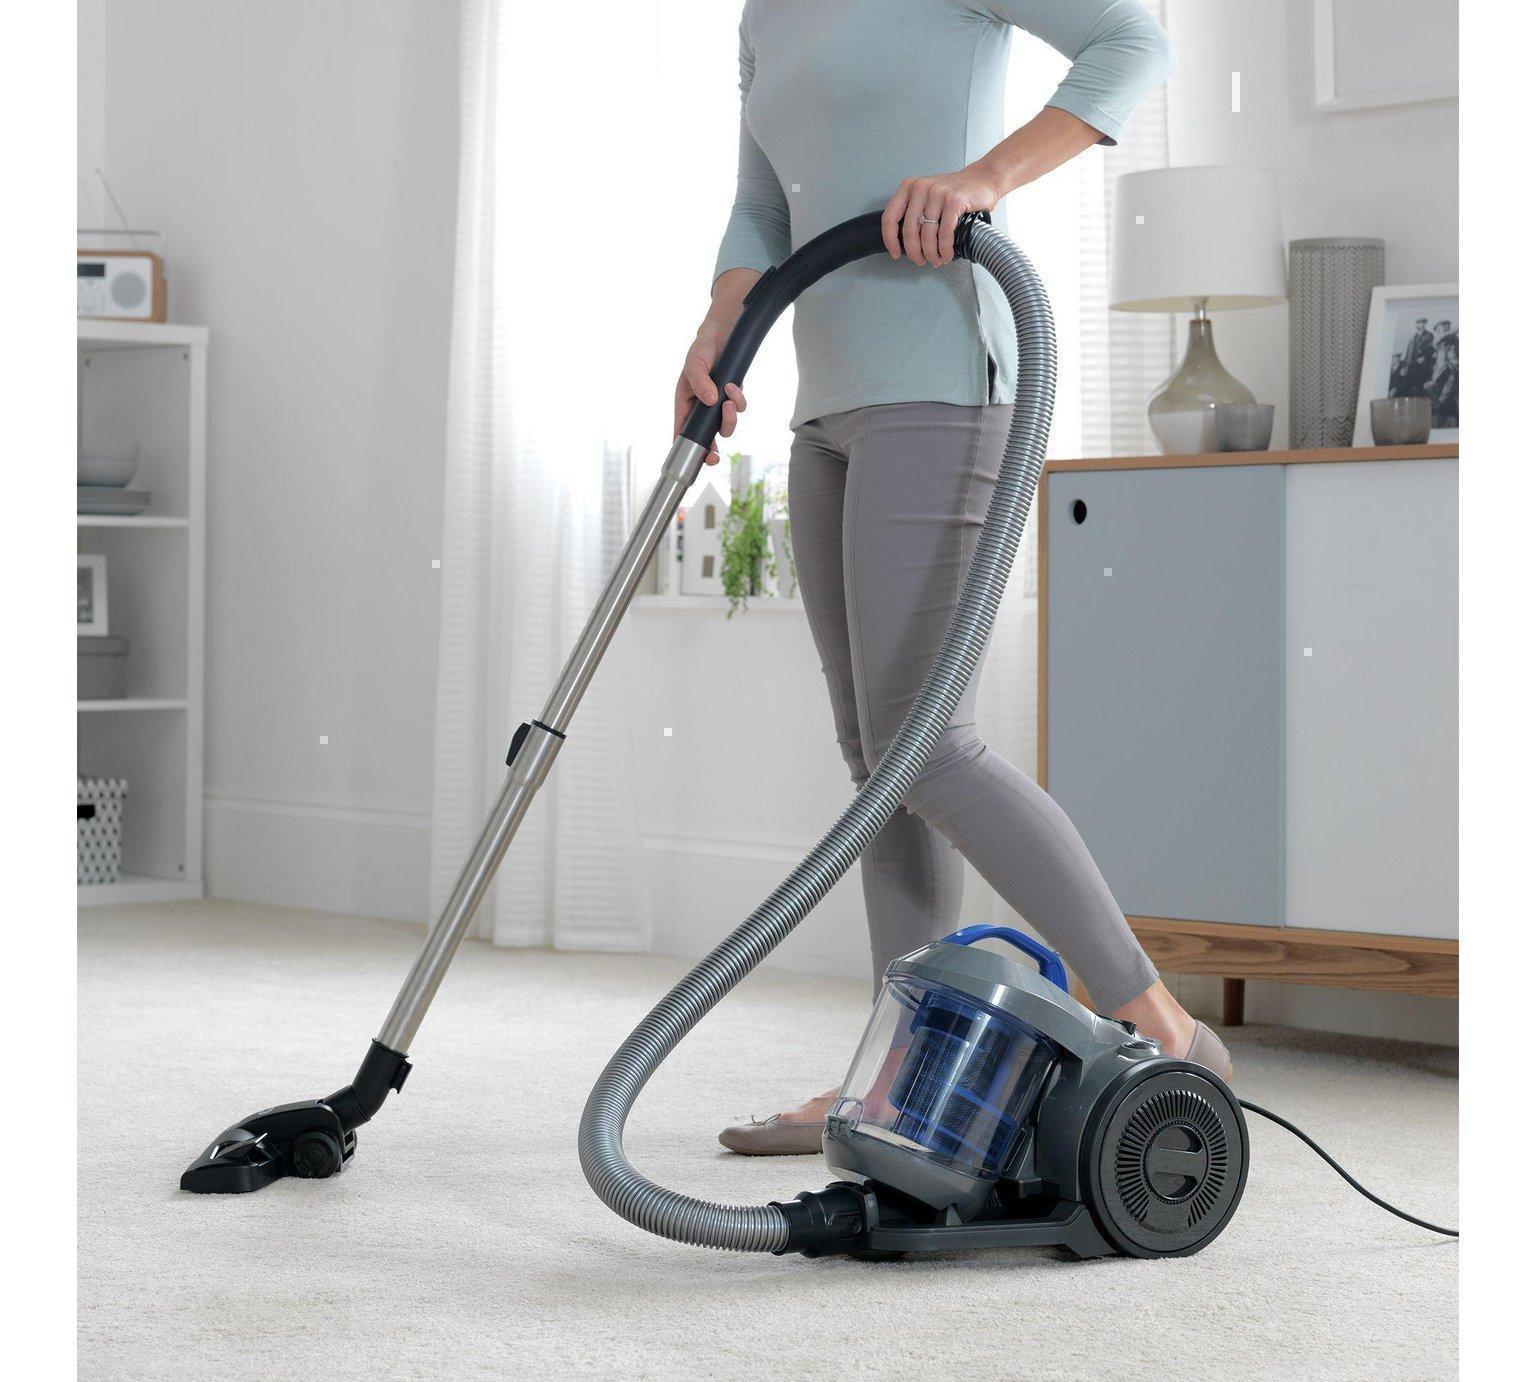 CCMBPV1P1 Power Pet Cylinder Vacuum Cleaner